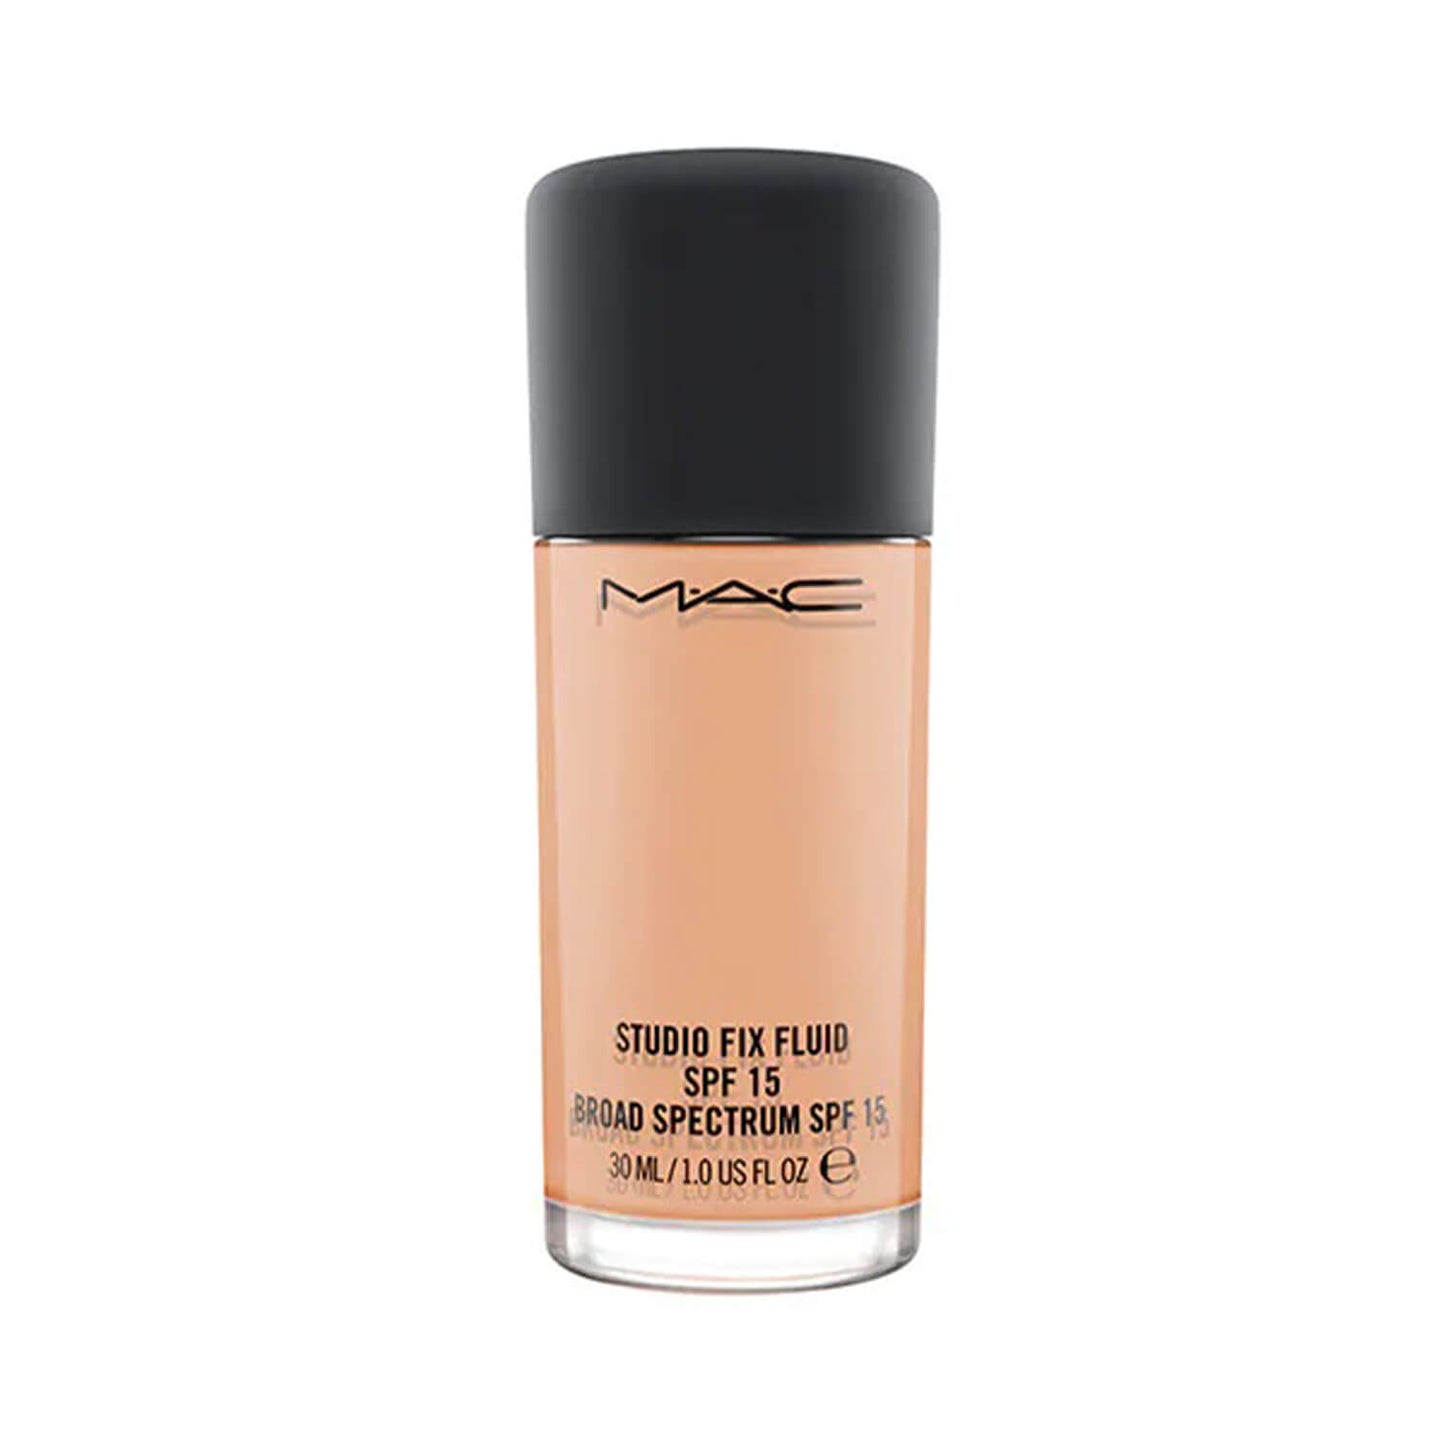 MAC Studio Fix Fluid Foundation with SPF 15 now available at Heygirl.pk in Karachi, Lahore, Islamabad across Pakistan.